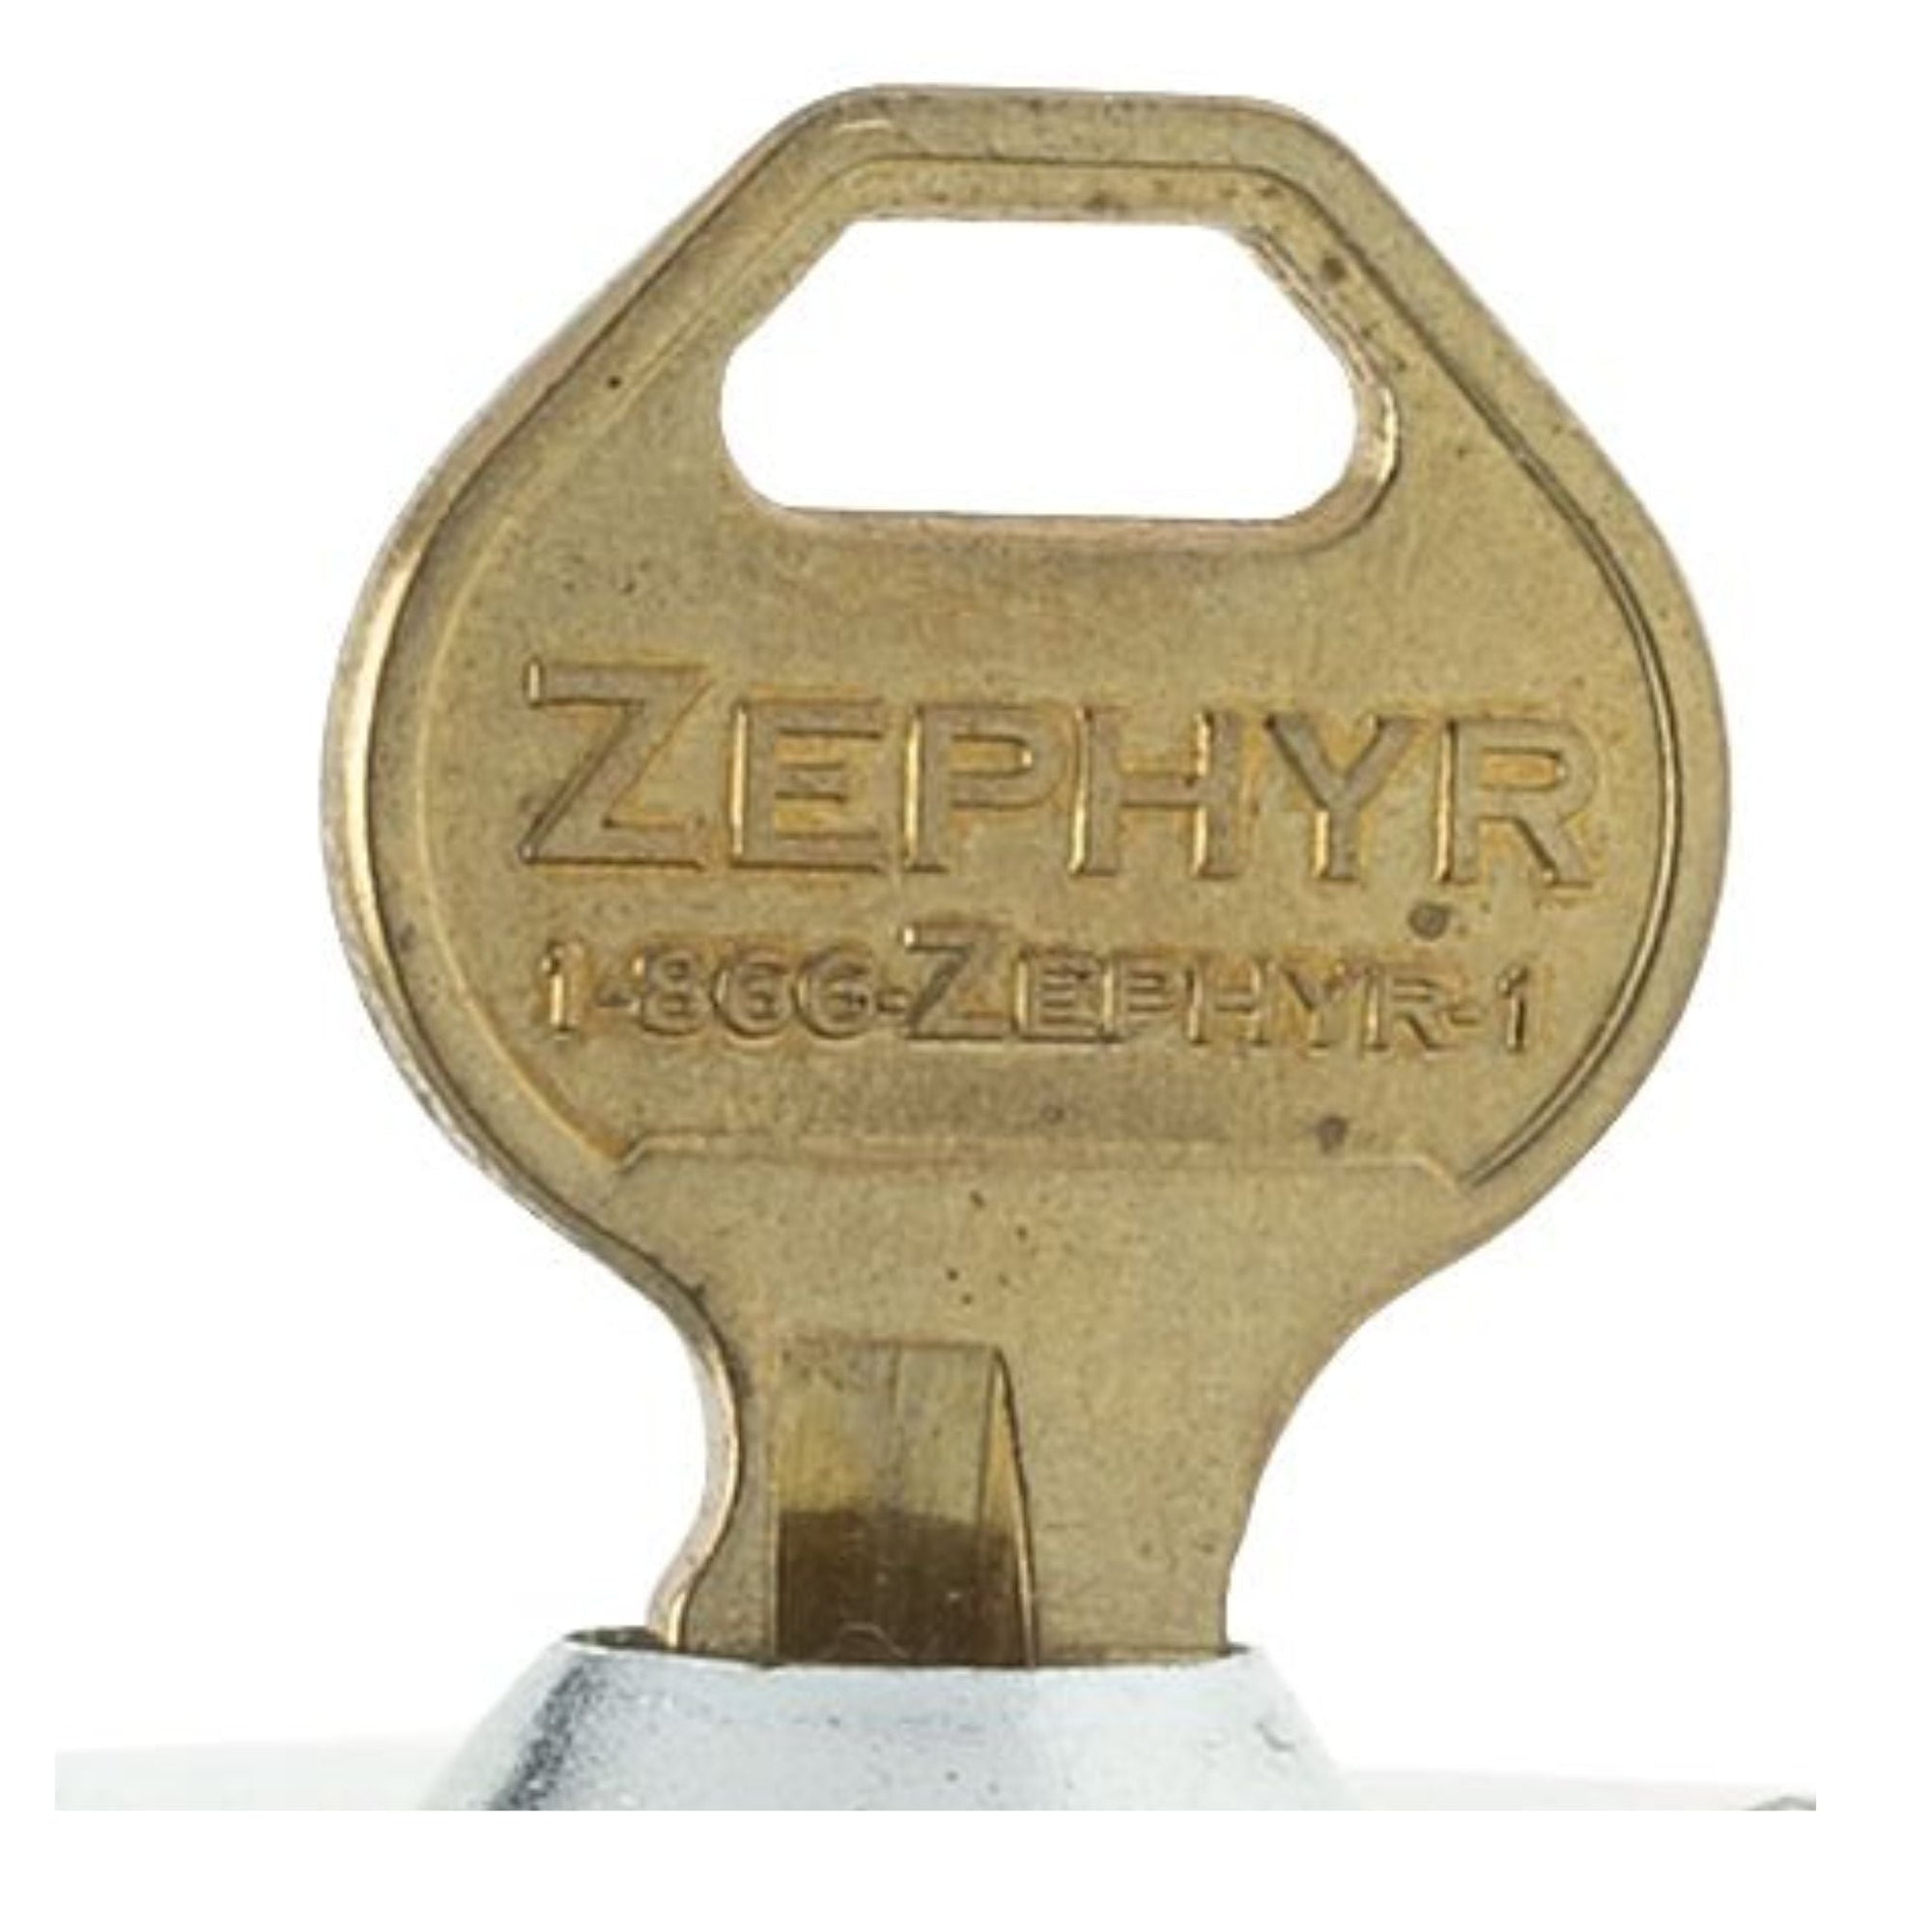 Zephyr Control Key for 1970 and 1971 Series Built In Combination Locker Locks with Dead Bolt Locking - The Lock Source